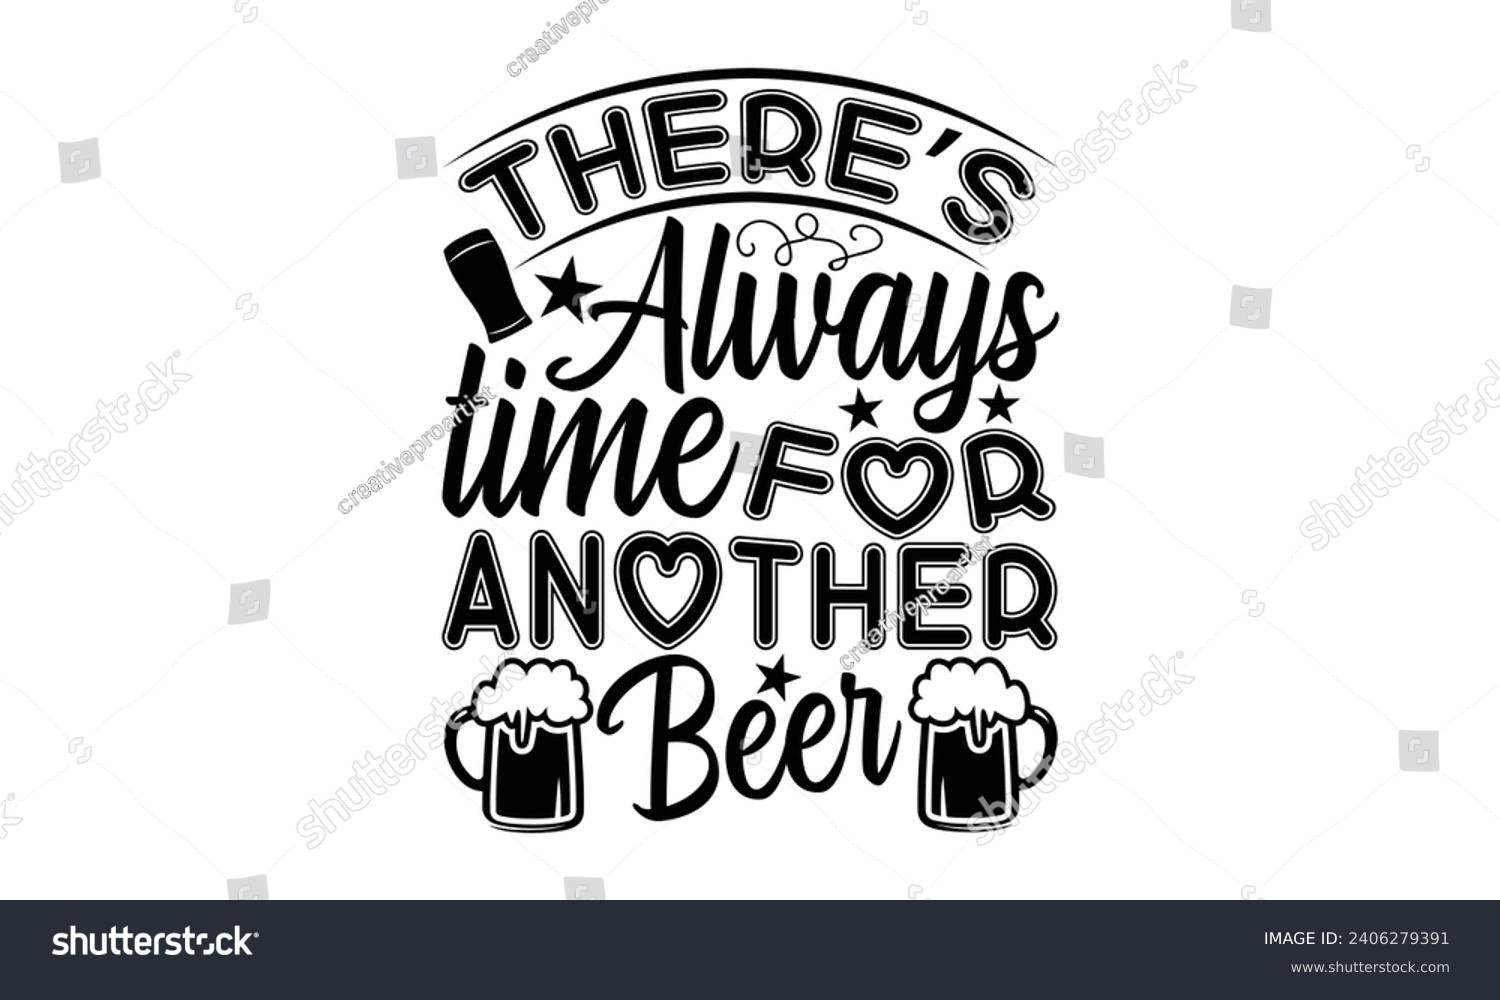 SVG of There’s Always Time For Another Beer- Beer t- shirt design, Handmade calligraphy vector illustration for Cutting Machine, Silhouette Cameo, Cricut, Vector illustration Template. svg